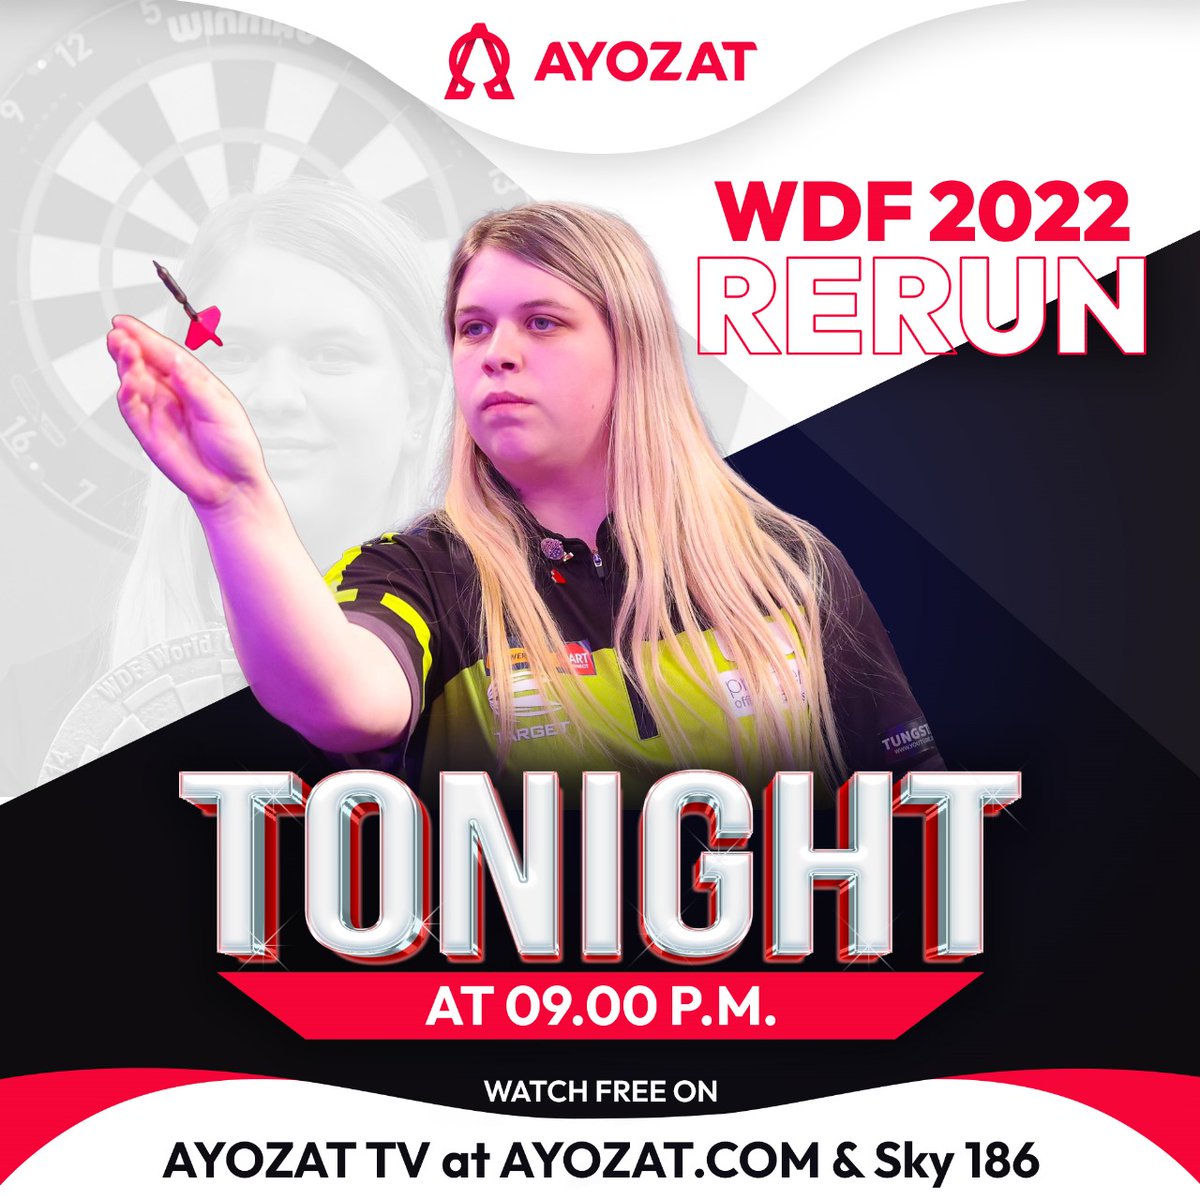 Missed the darting action the first time around? No worries! Join us for a rerun of the thrilling World Darts Federation Lakeside Championship 2022 every Monday at 9pm on AYOZAT TV at ayozat.com and Sky 186 #darts #wdf #lakeside #worldchampionship @DartsWDF